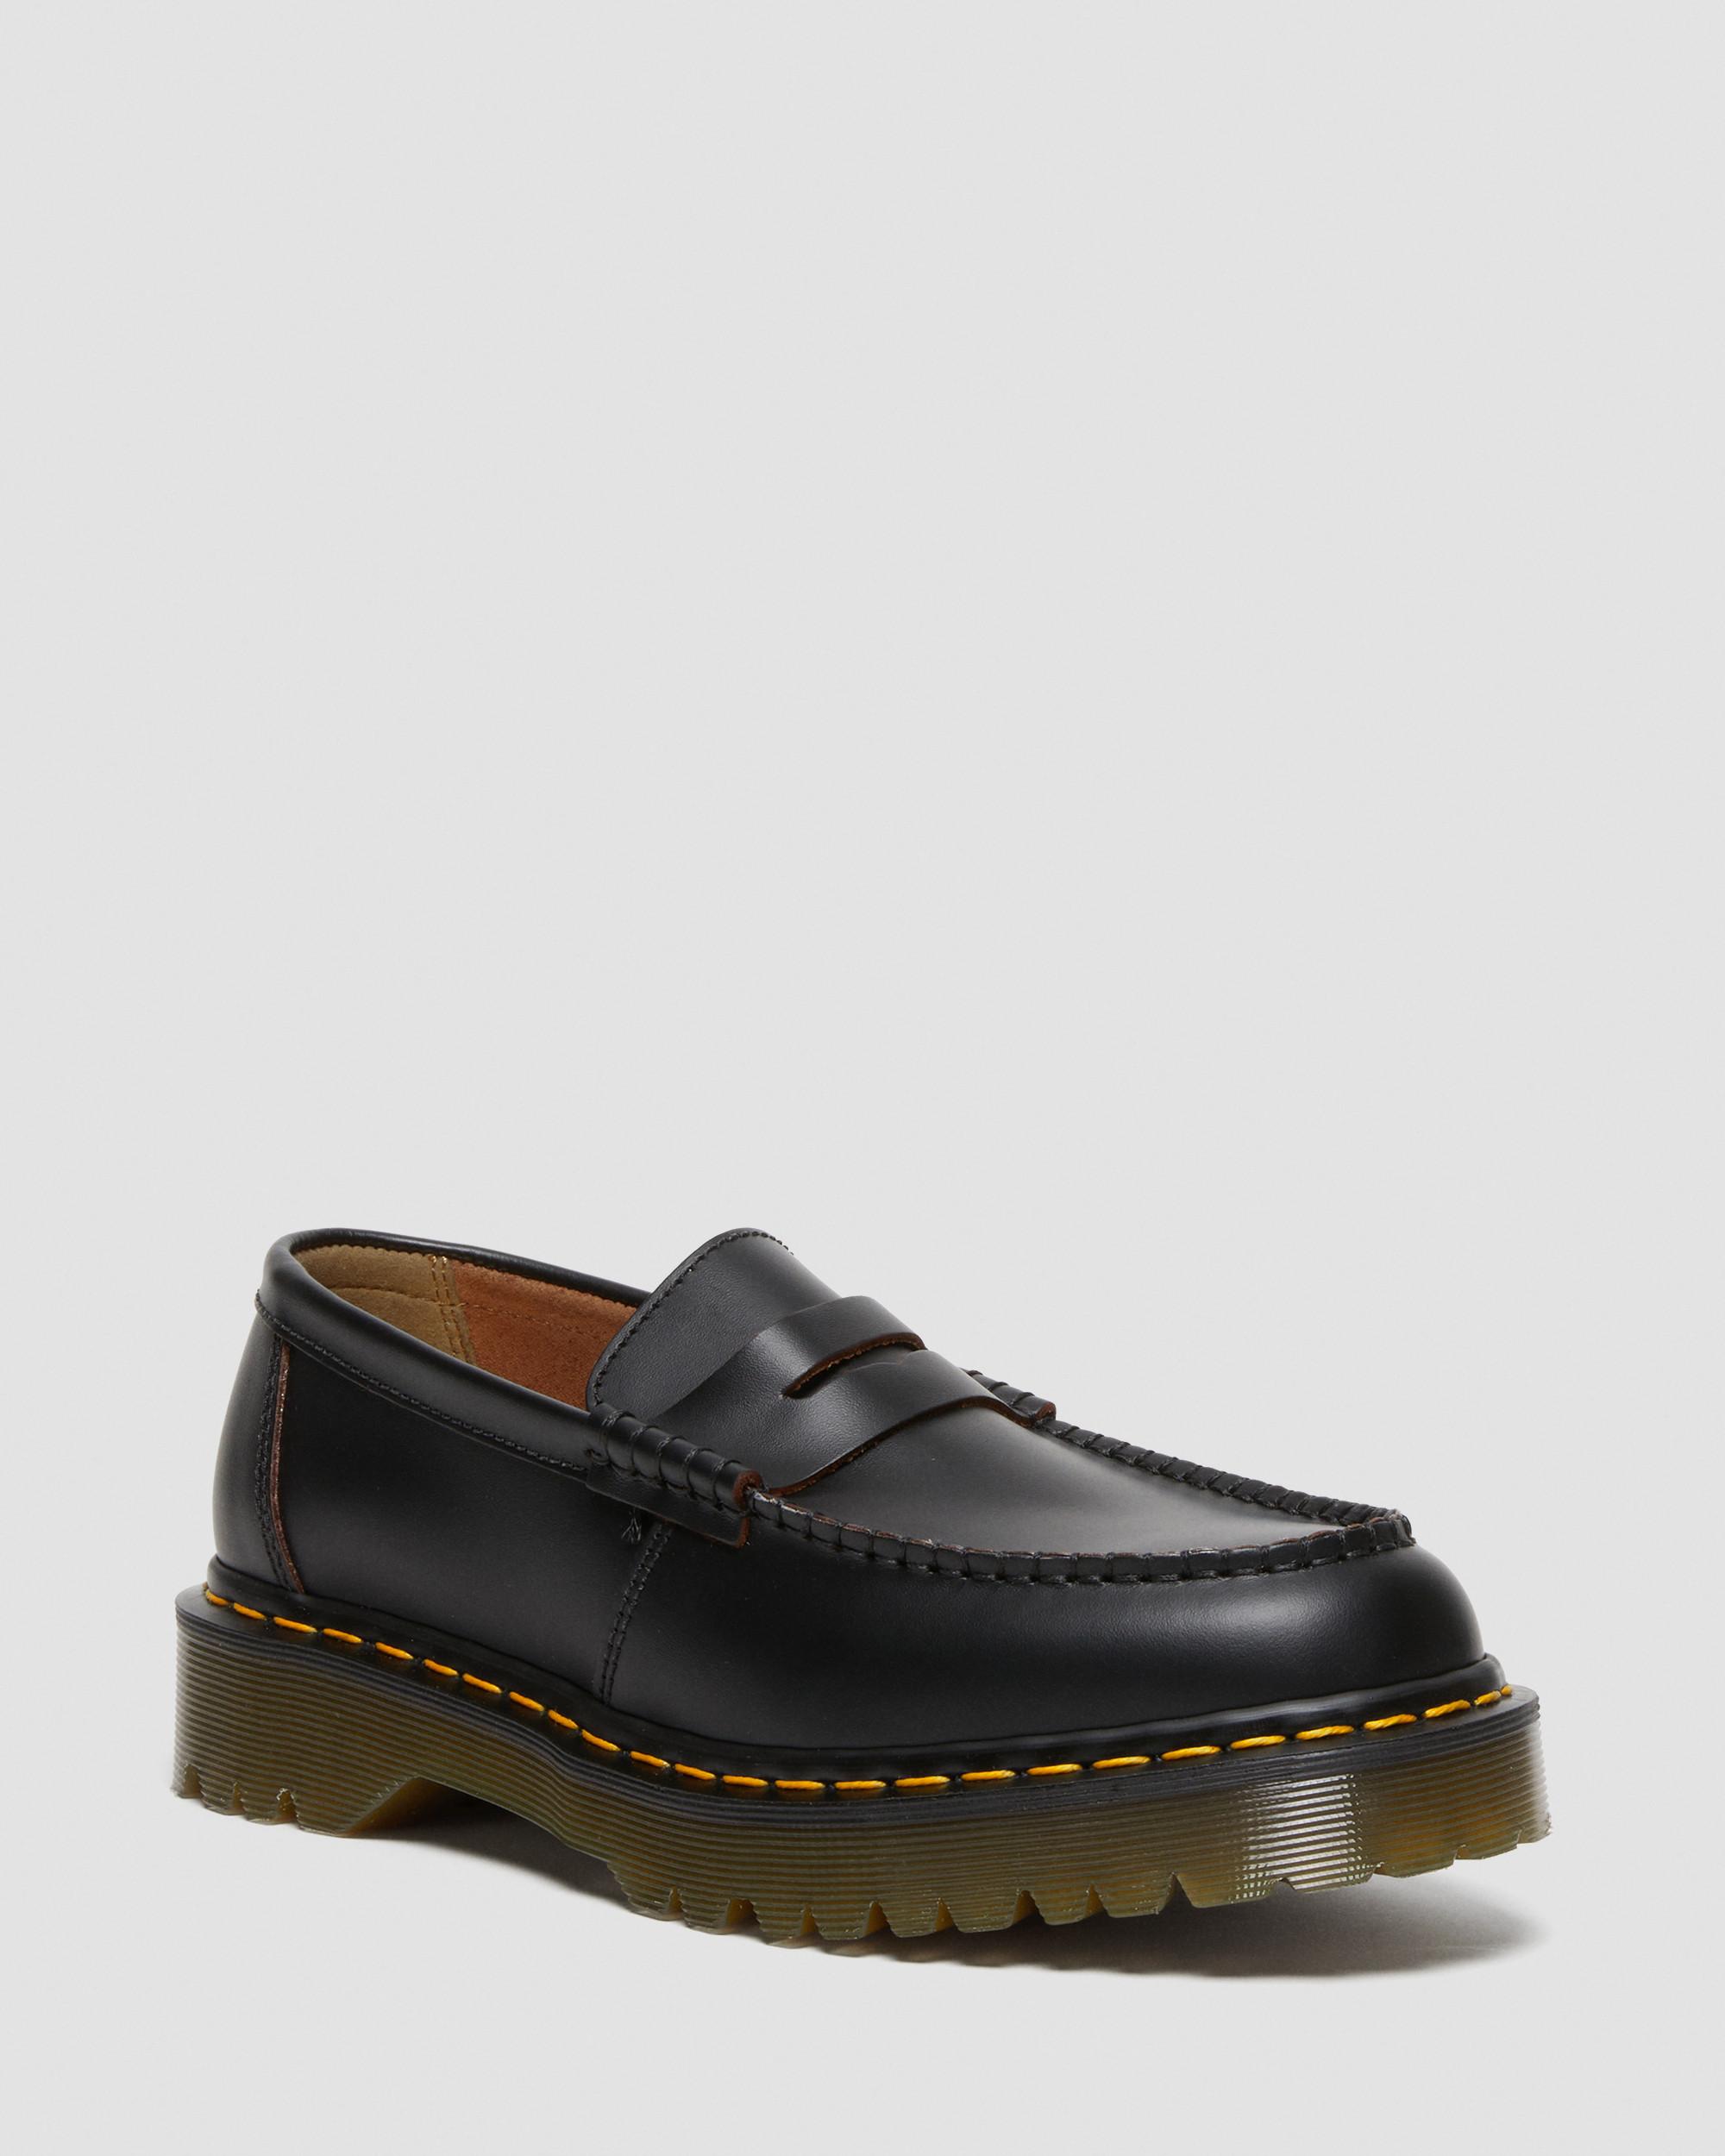 Mens Shoes Slip-on shoes Loafers Dr Martens Penton Bex Double Stitch Leather Loafers in Black for Men 